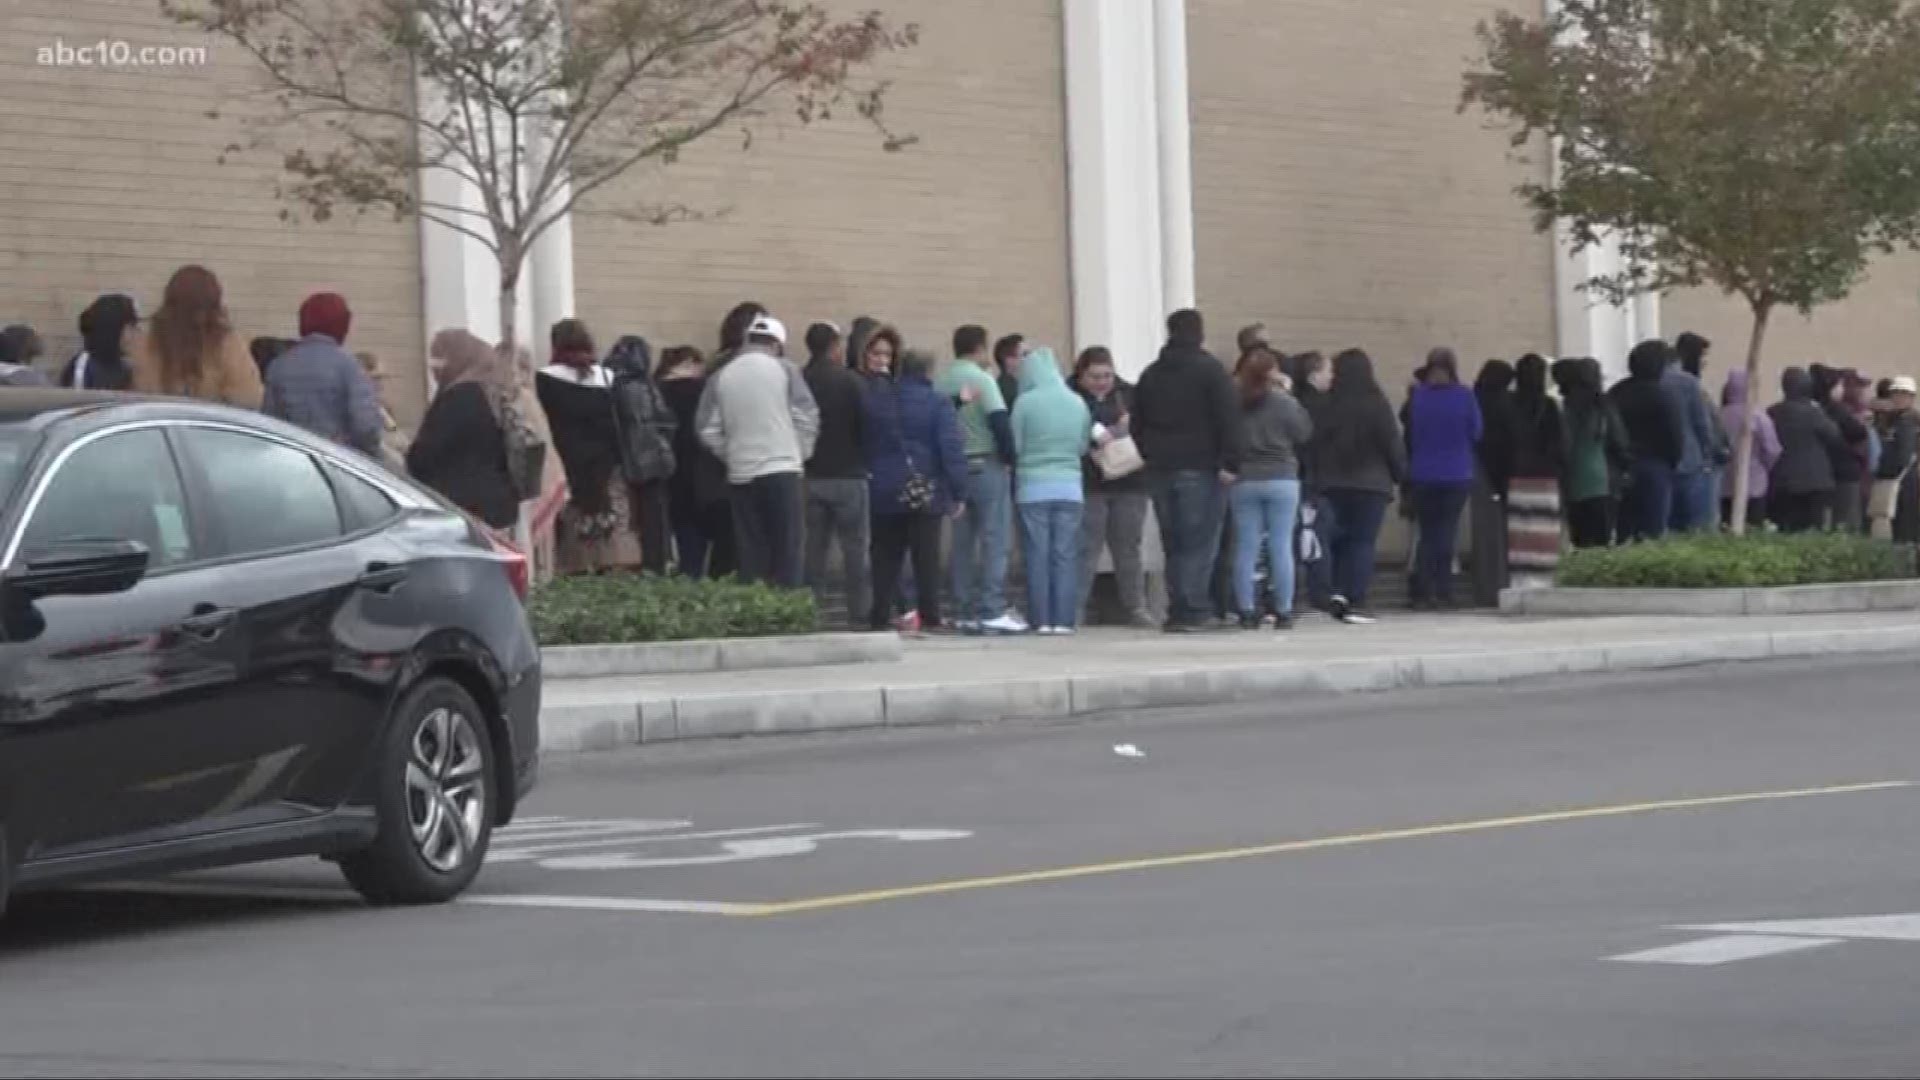 Hundreds of shoppers line up to get their hands on deals.